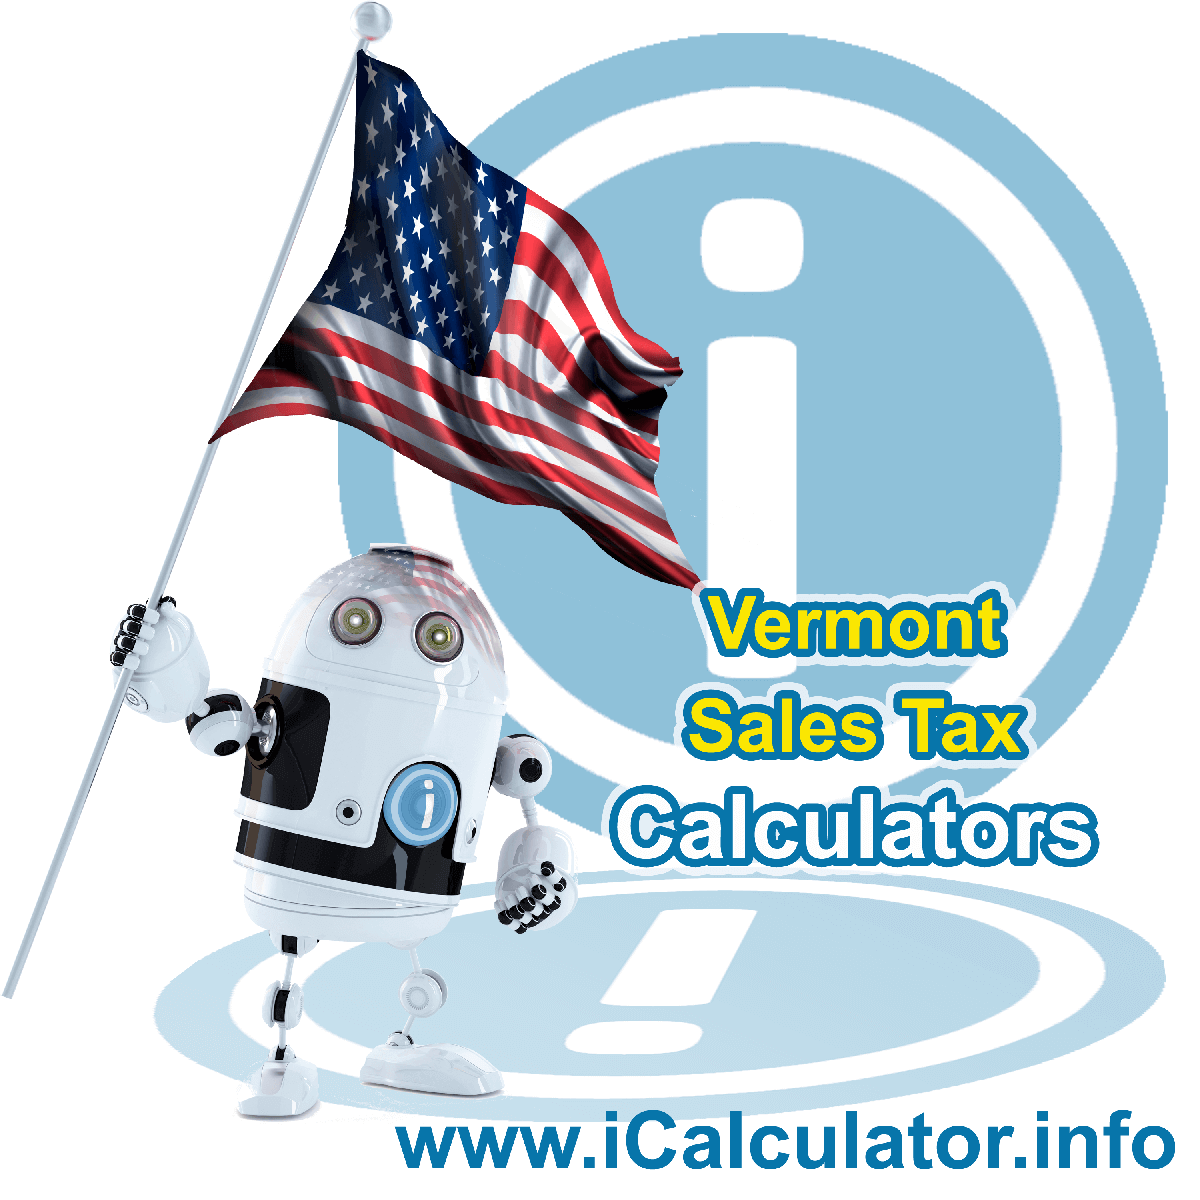 South Burlington Sales Rates: This image illustrates a calculator robot calculating South Burlington sales tax manually using the South Burlington Sales Tax Formula. You can use this information to calculate South Burlington Sales Tax manually or use the South Burlington Sales Tax Calculator to calculate sales tax online.